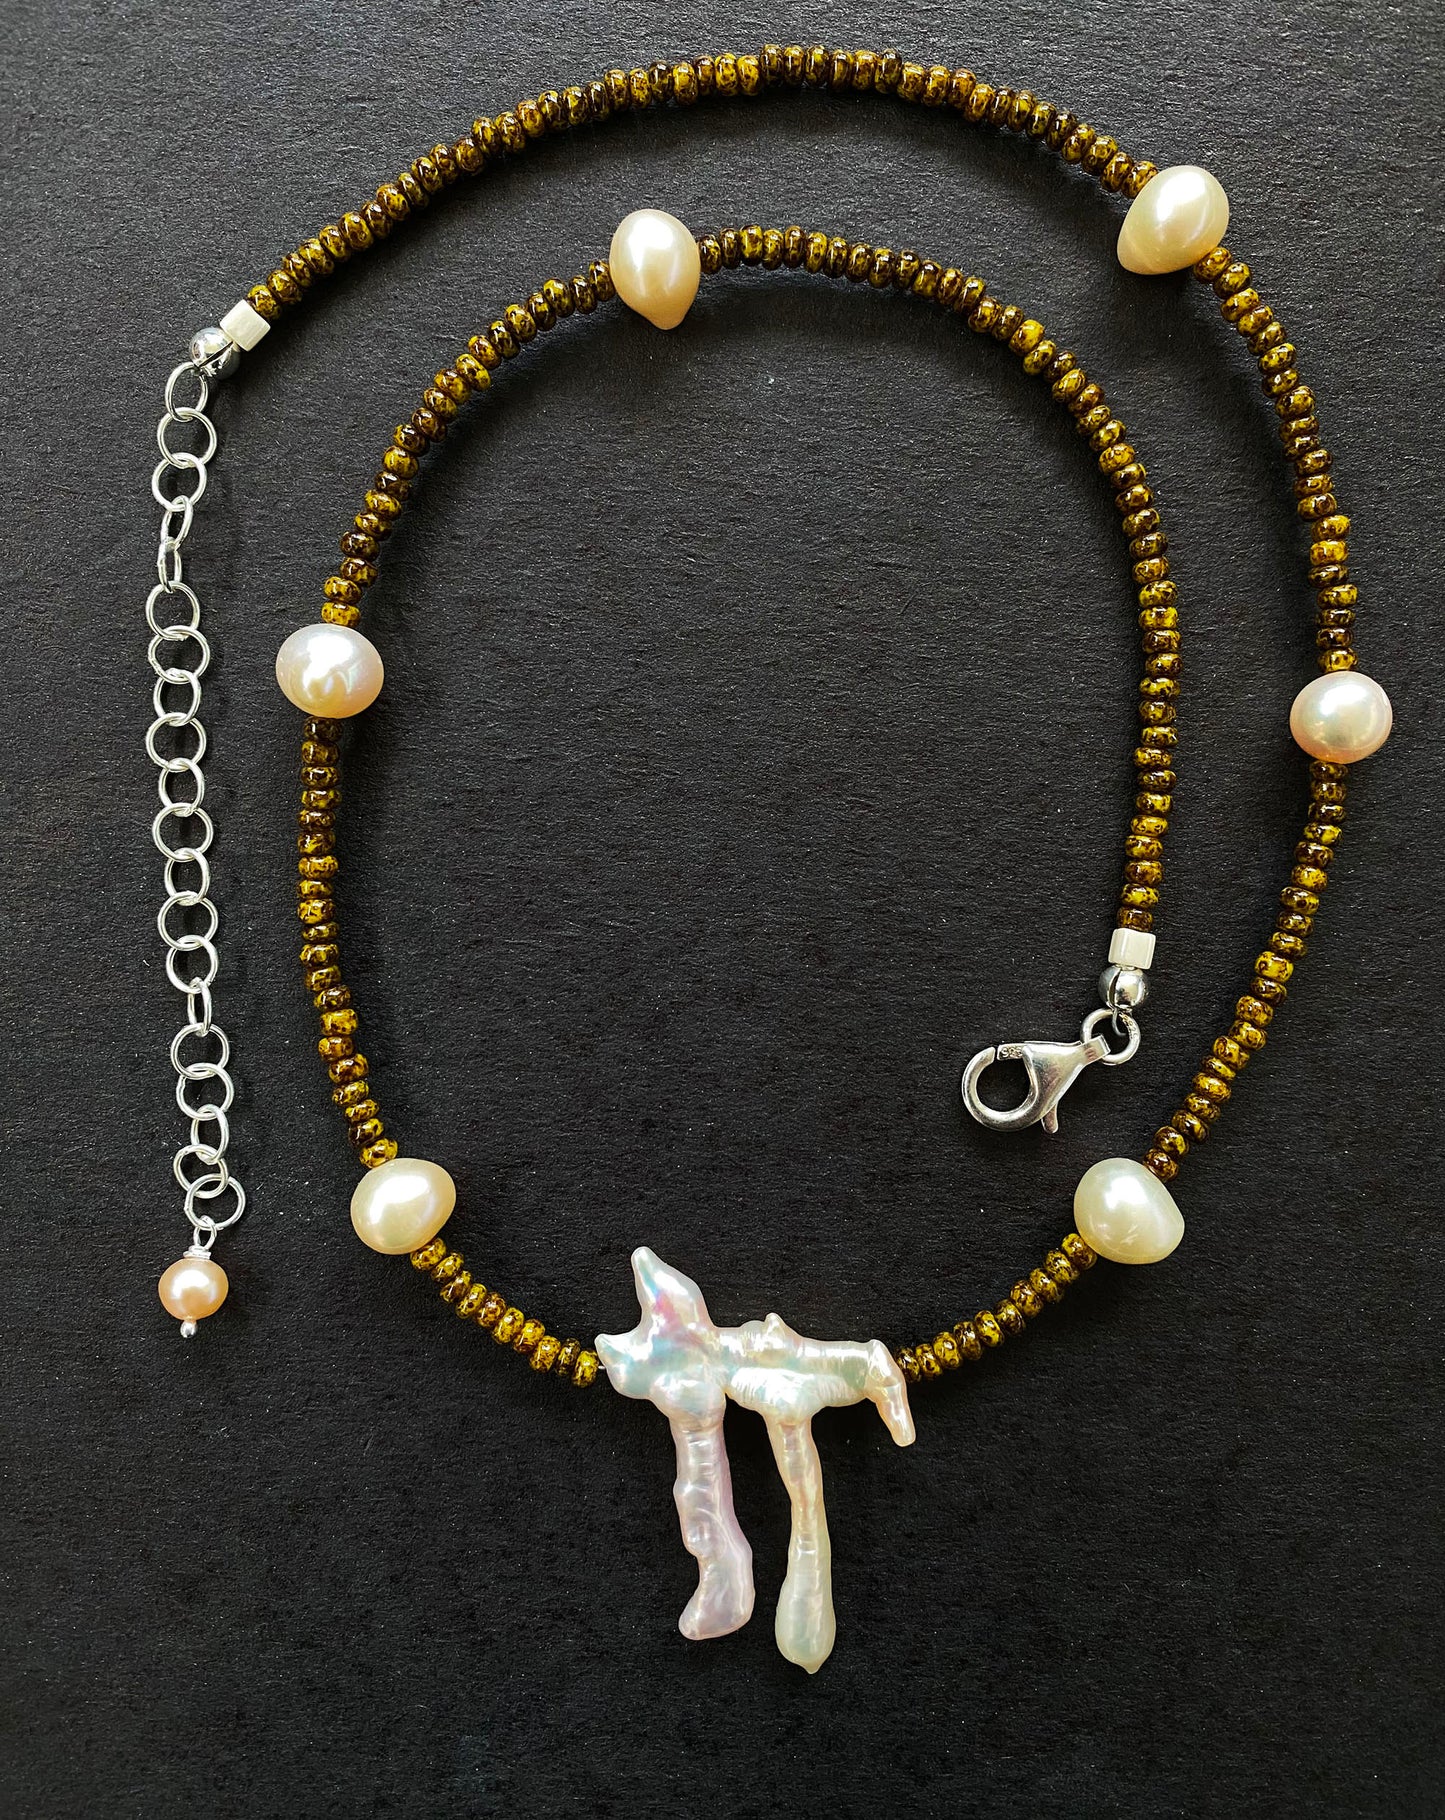 Artistic Zen Pearl Necklace with Deep Olive Travertine Beads by Linda Queally